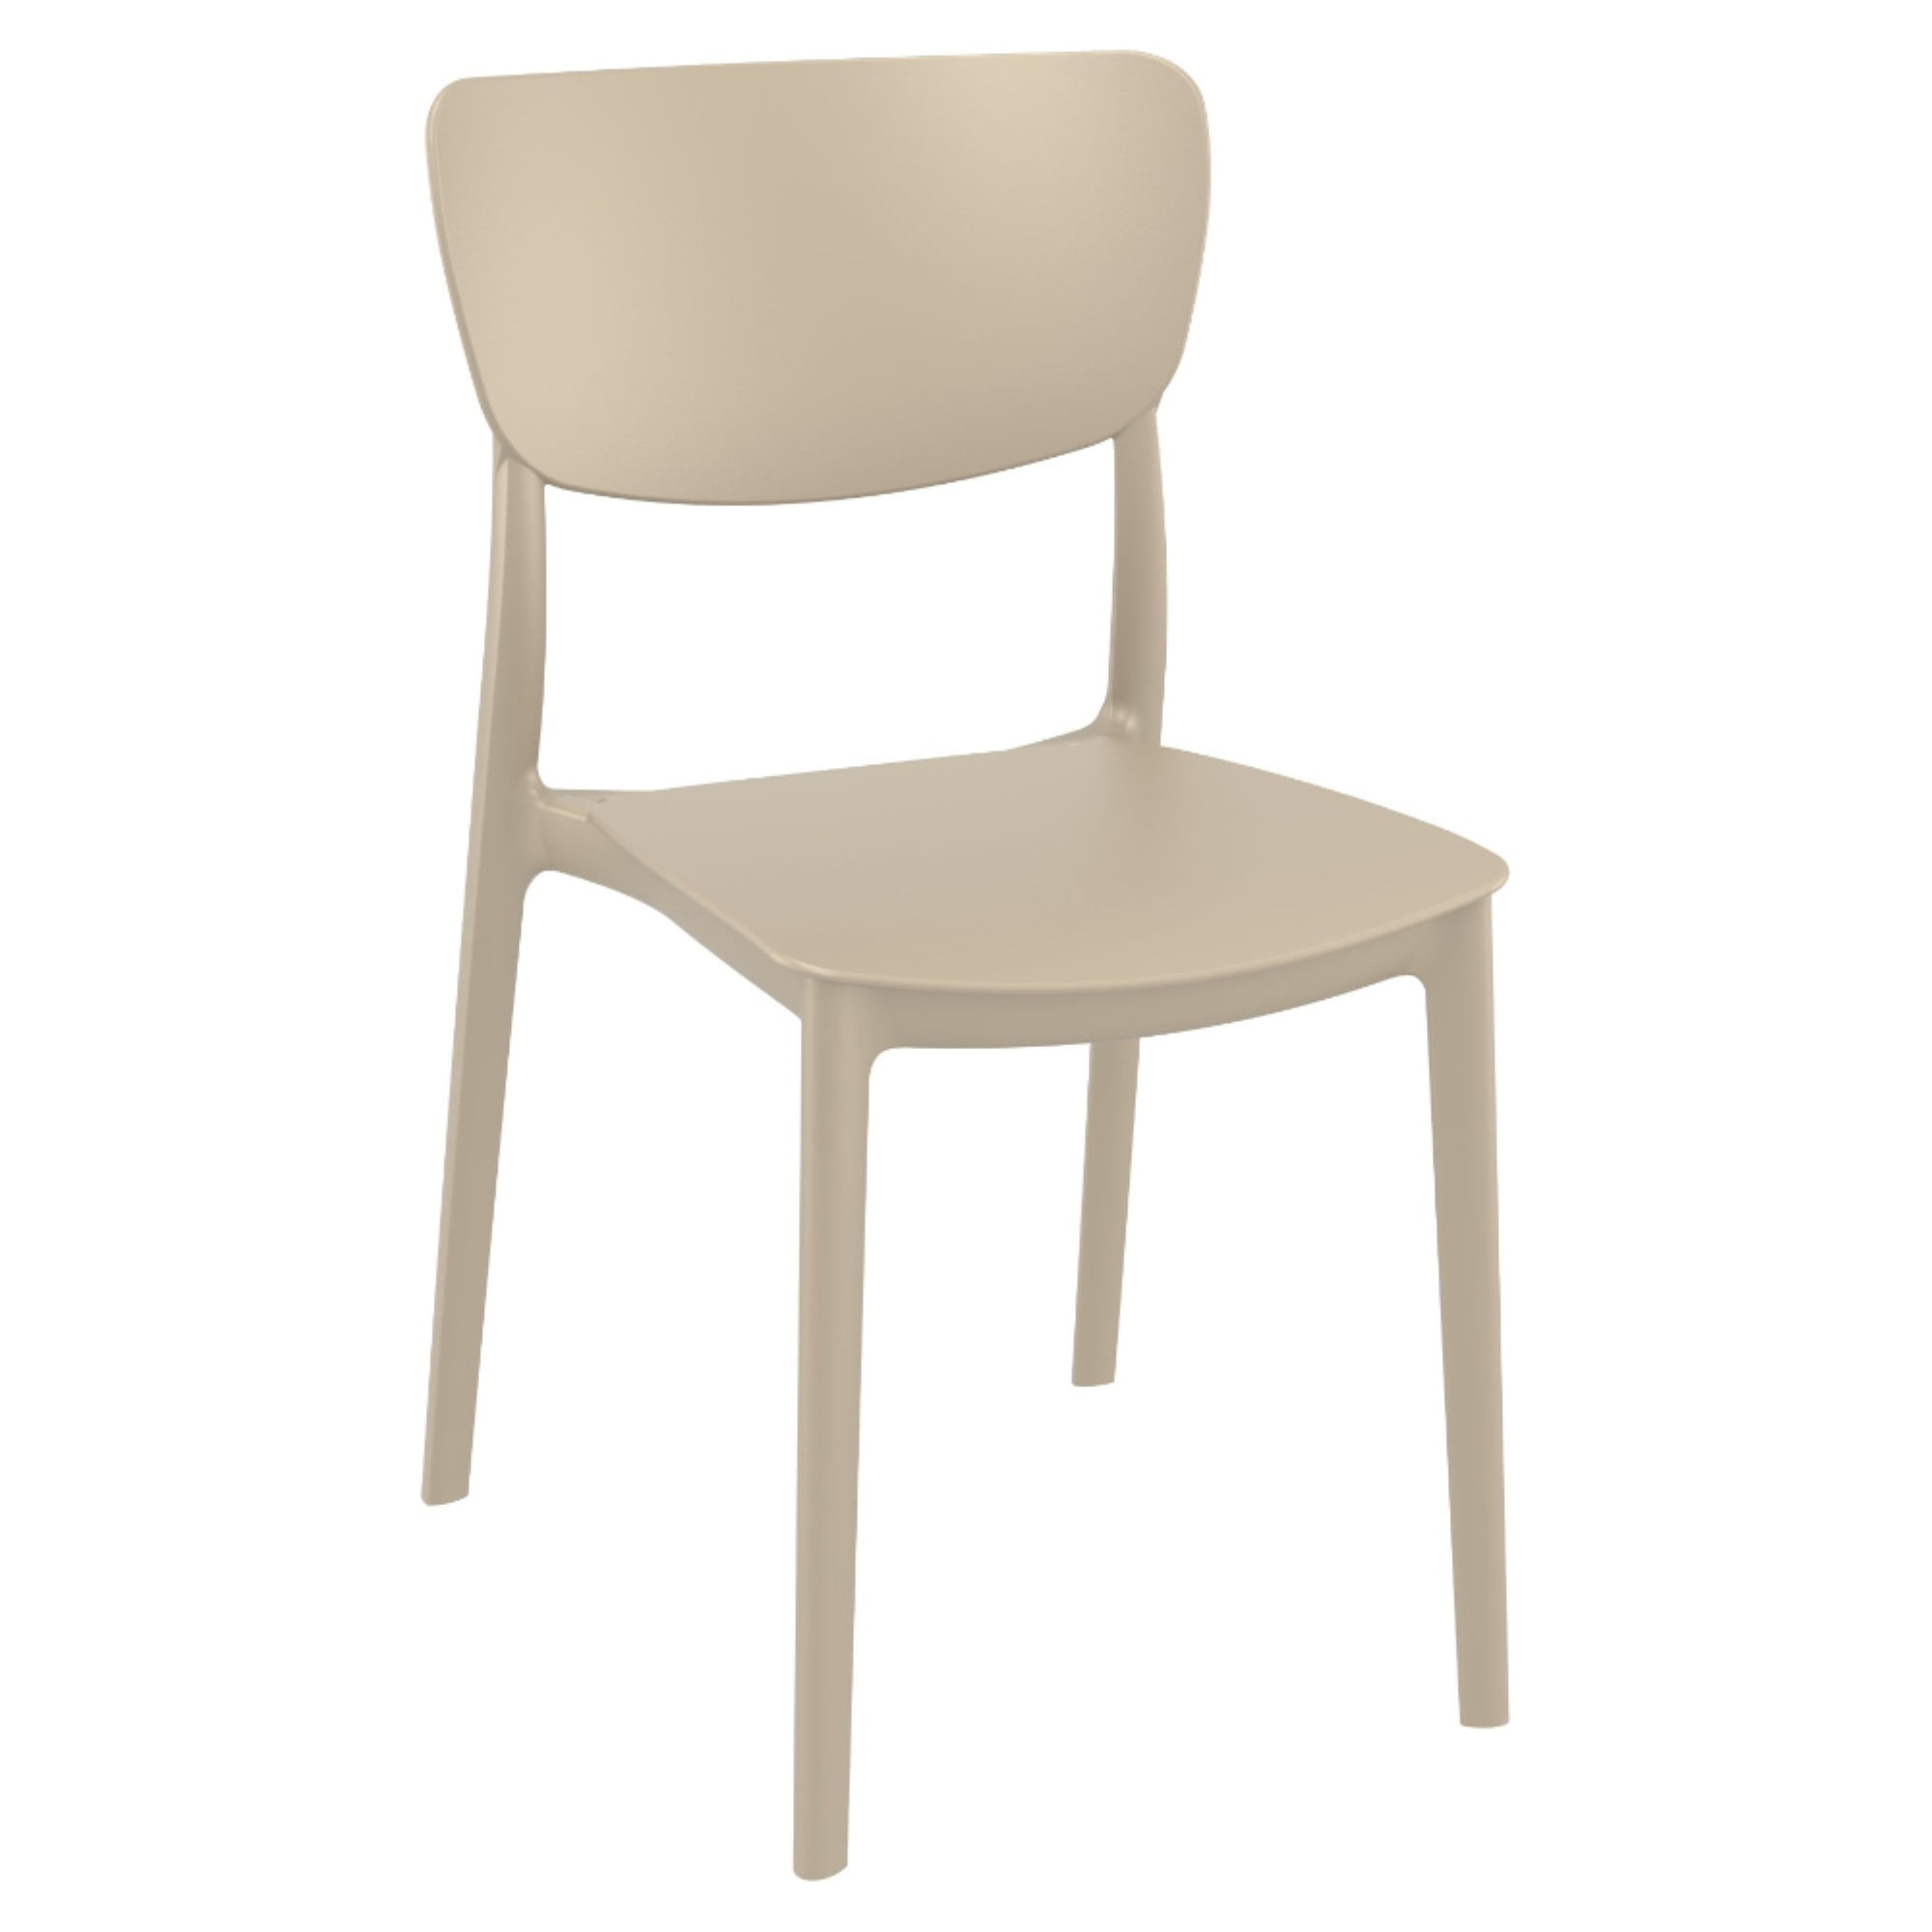 Isp127-dvr 32.3 X 17.7 X 21 In. Monna Outdoor Dining Chair, Taupe